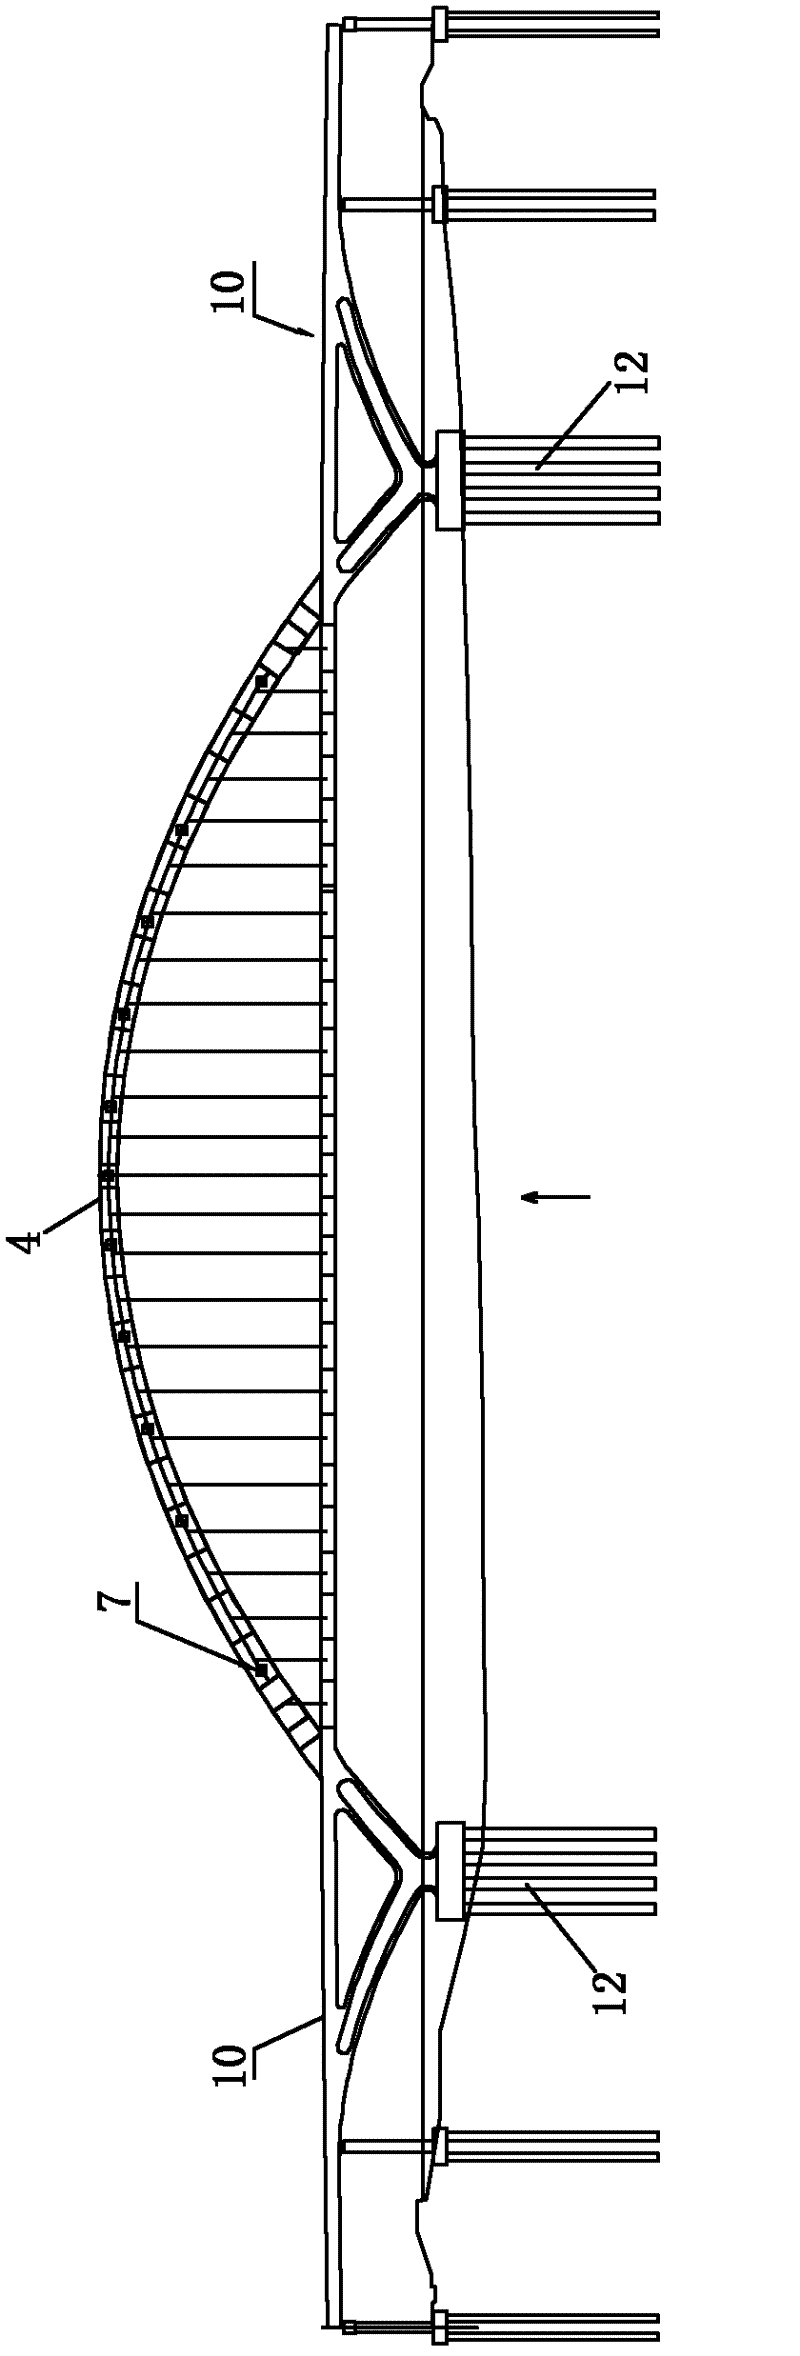 Integral lifting system and construction method for arch bridge ribs